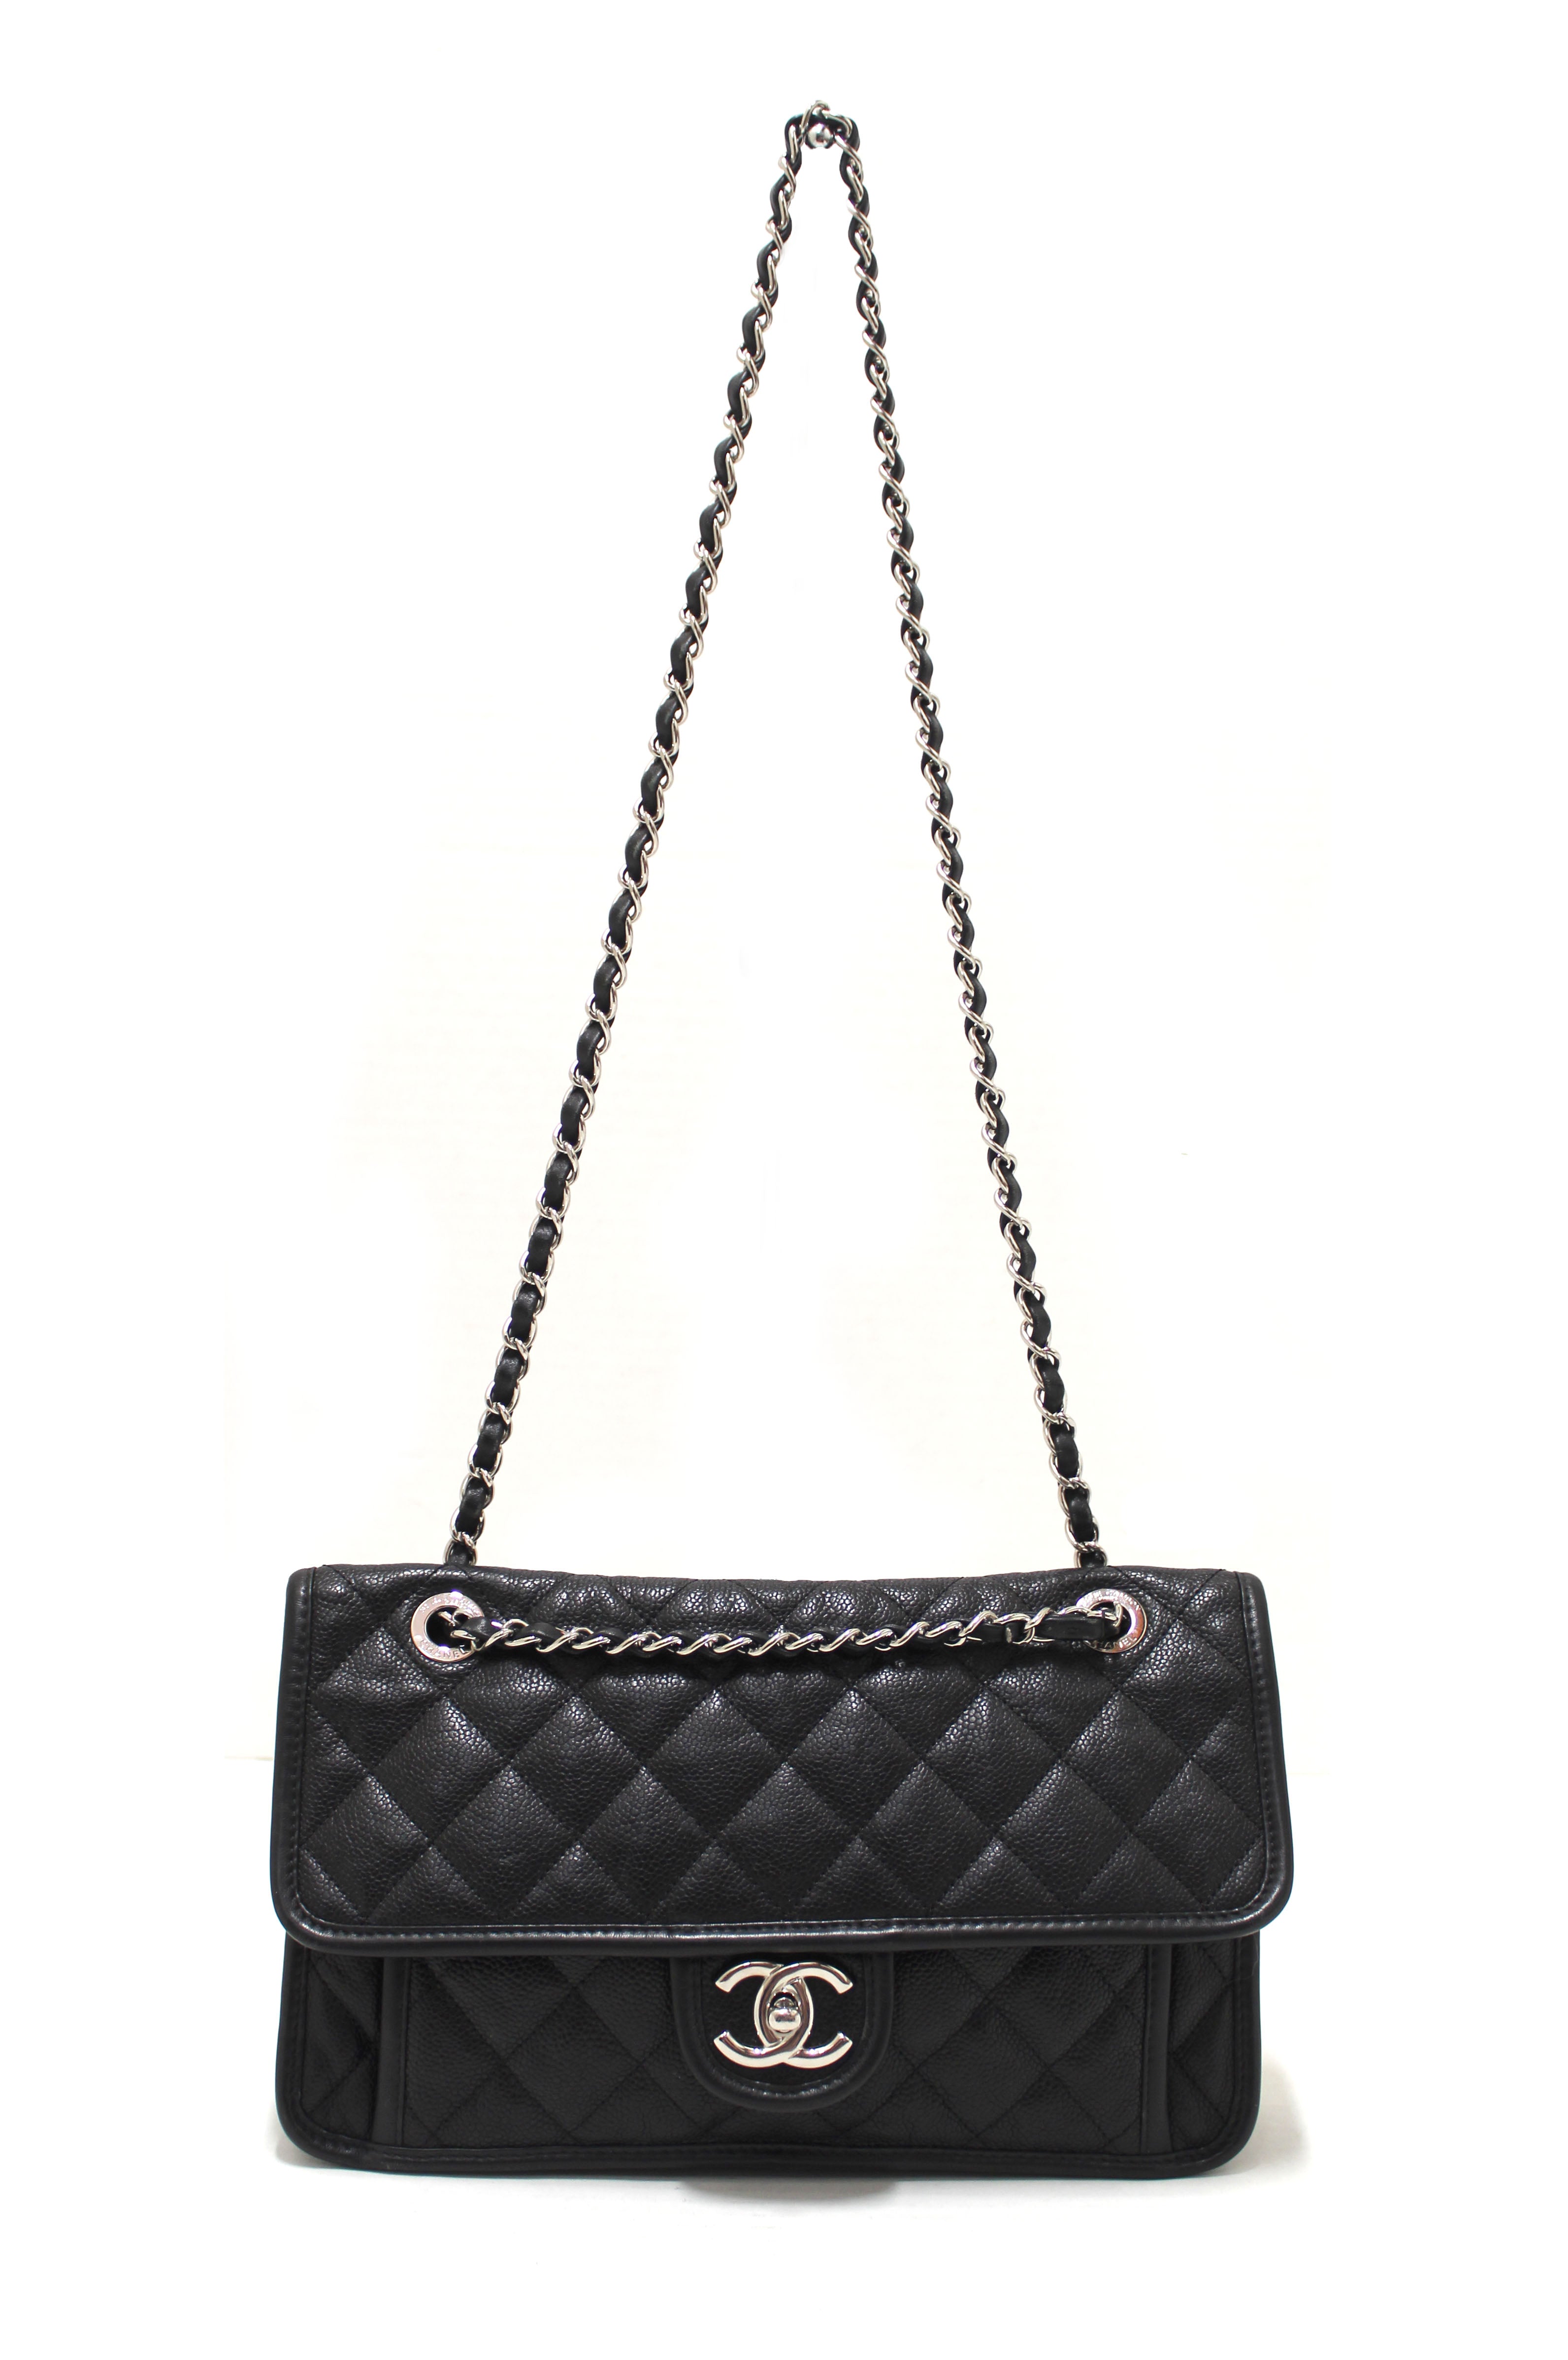 Authentic Chanel Black Quilted Caviar Leather Riviera Flap